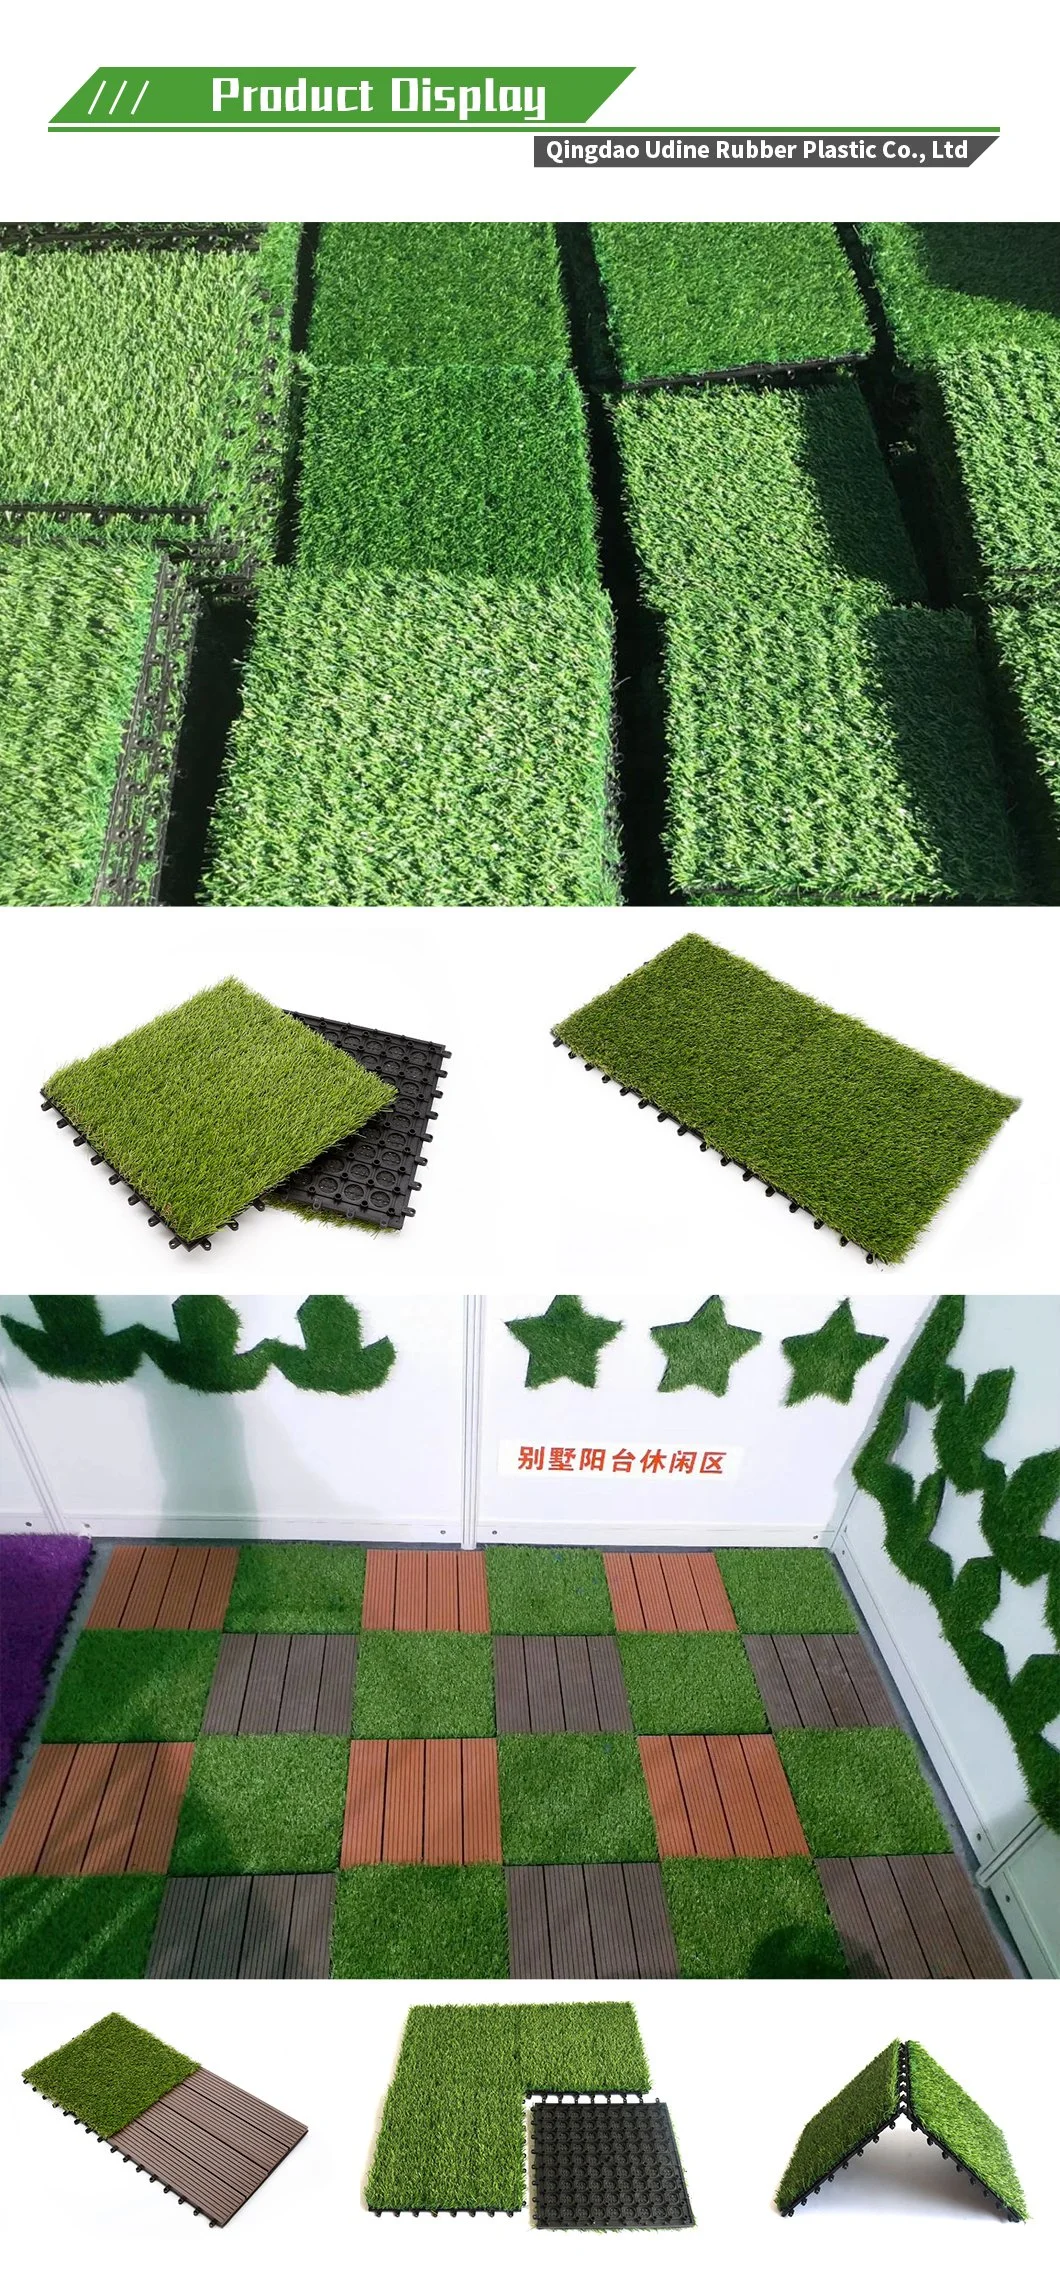 China Manufacturer/Factory High Quality Outdoor Indoor Balcony Landscaping Sport Puzzle Interlocking Synthetic Fake Artificial Grass Tile Turf for Garden DIY